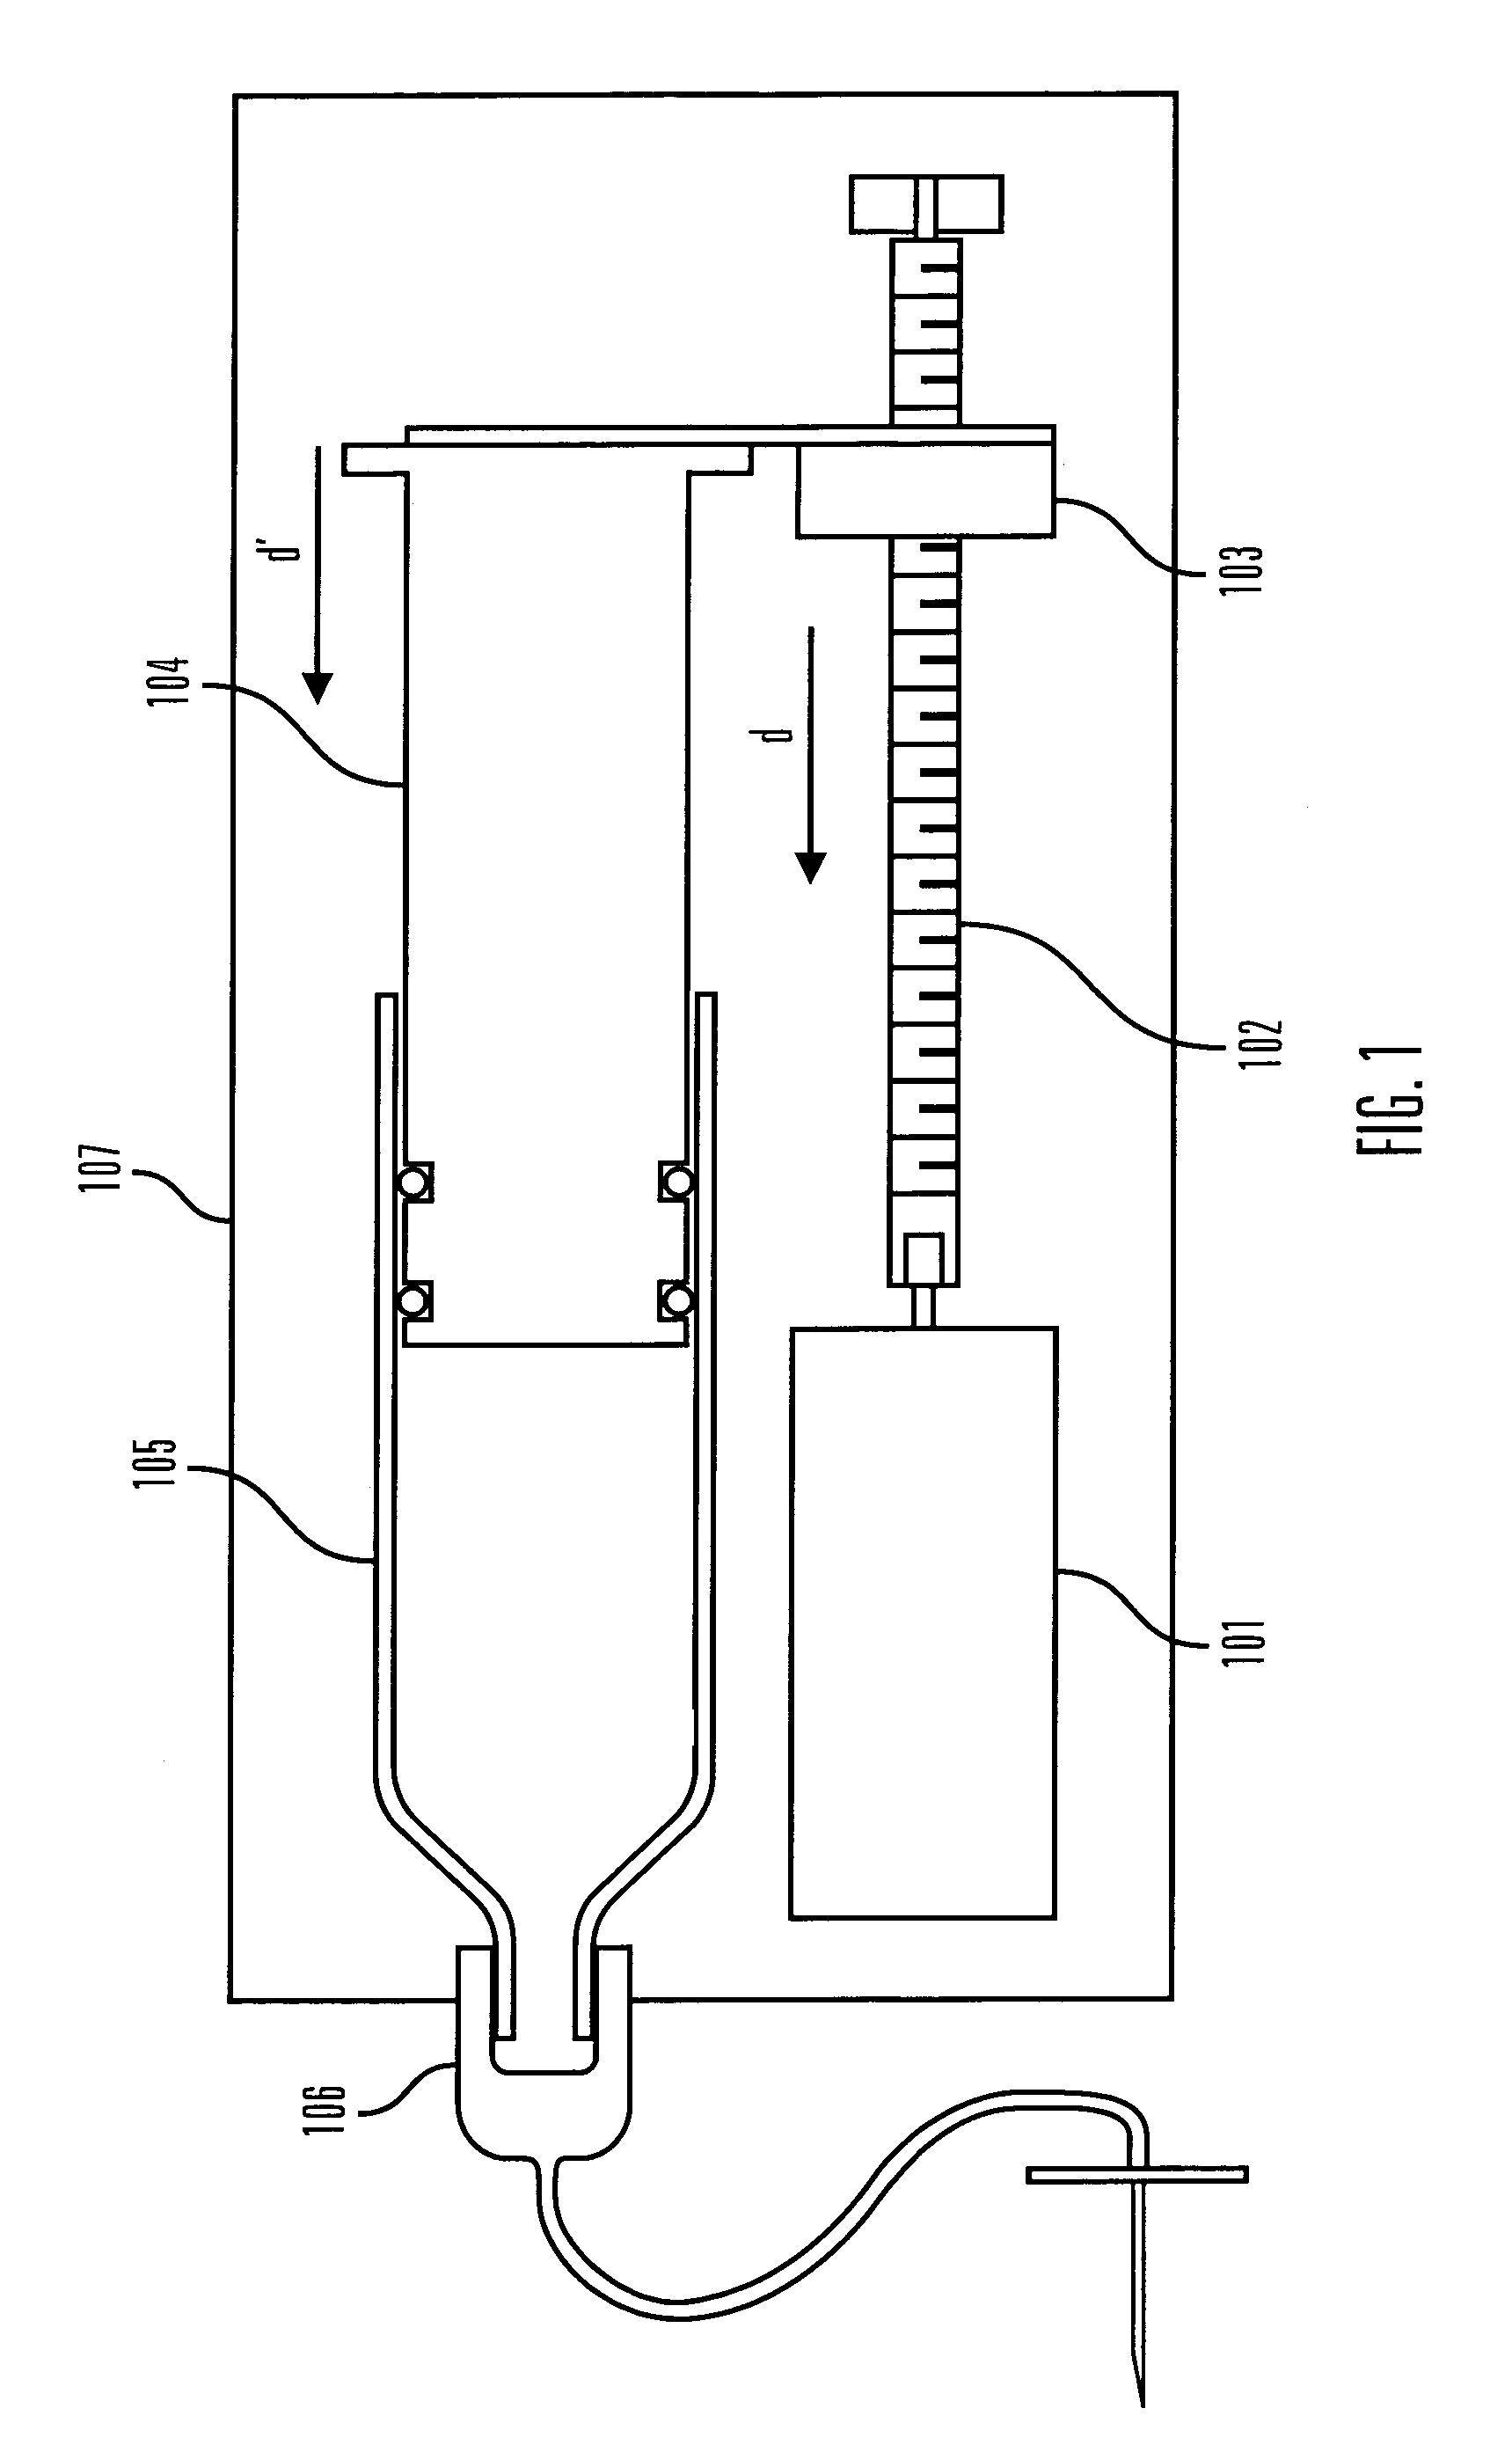 Lead screw driven reservoir with integral plunger nut and method of using the same